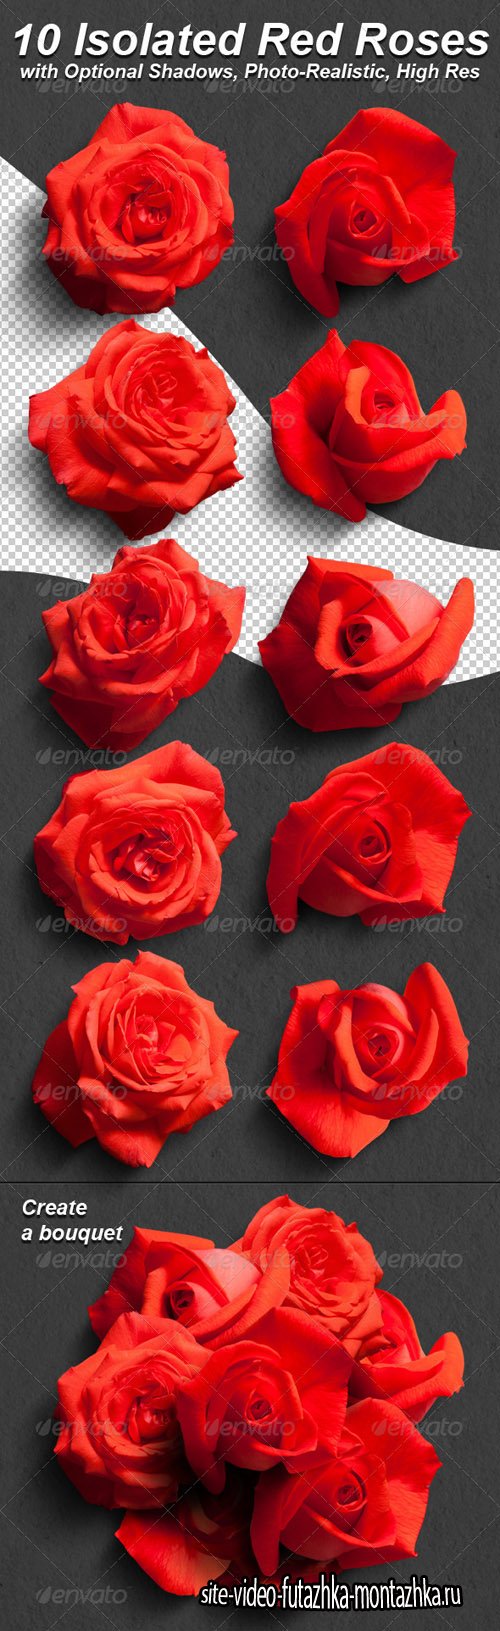 GraphicRiver 10 Photo-Realistic Isolated Red Roses